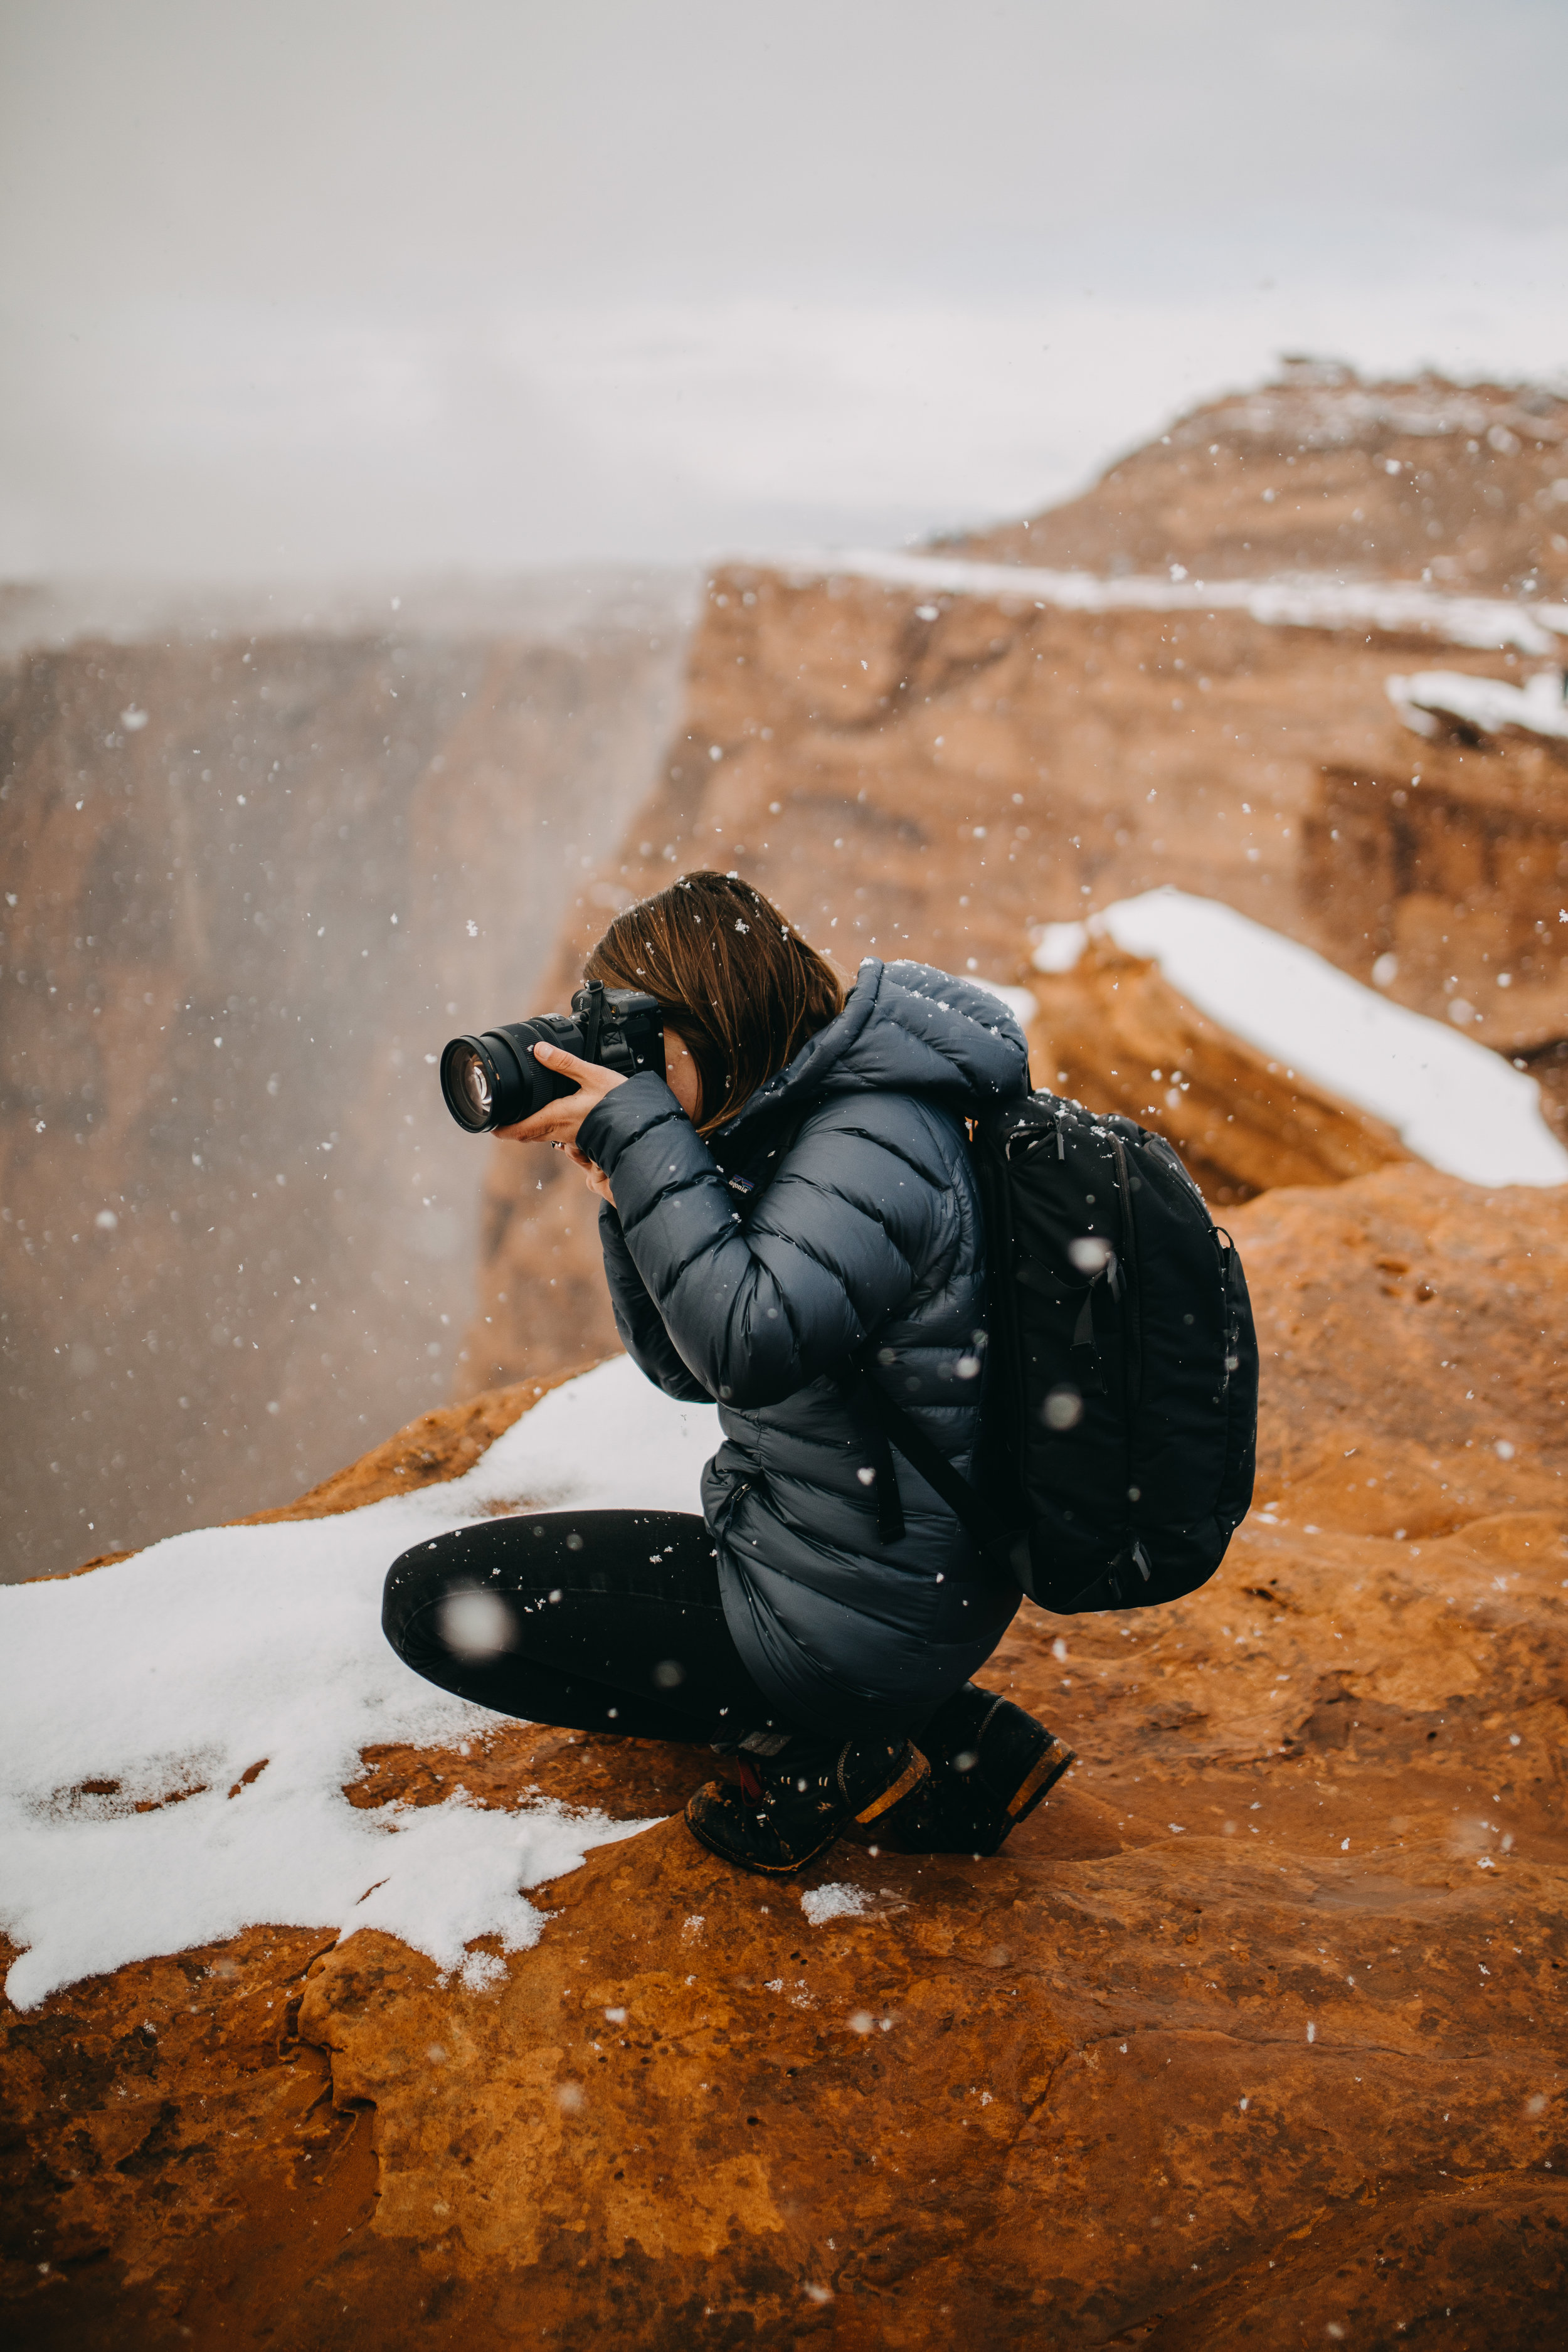 Pictures of Snowfall at Horseshoe Bend